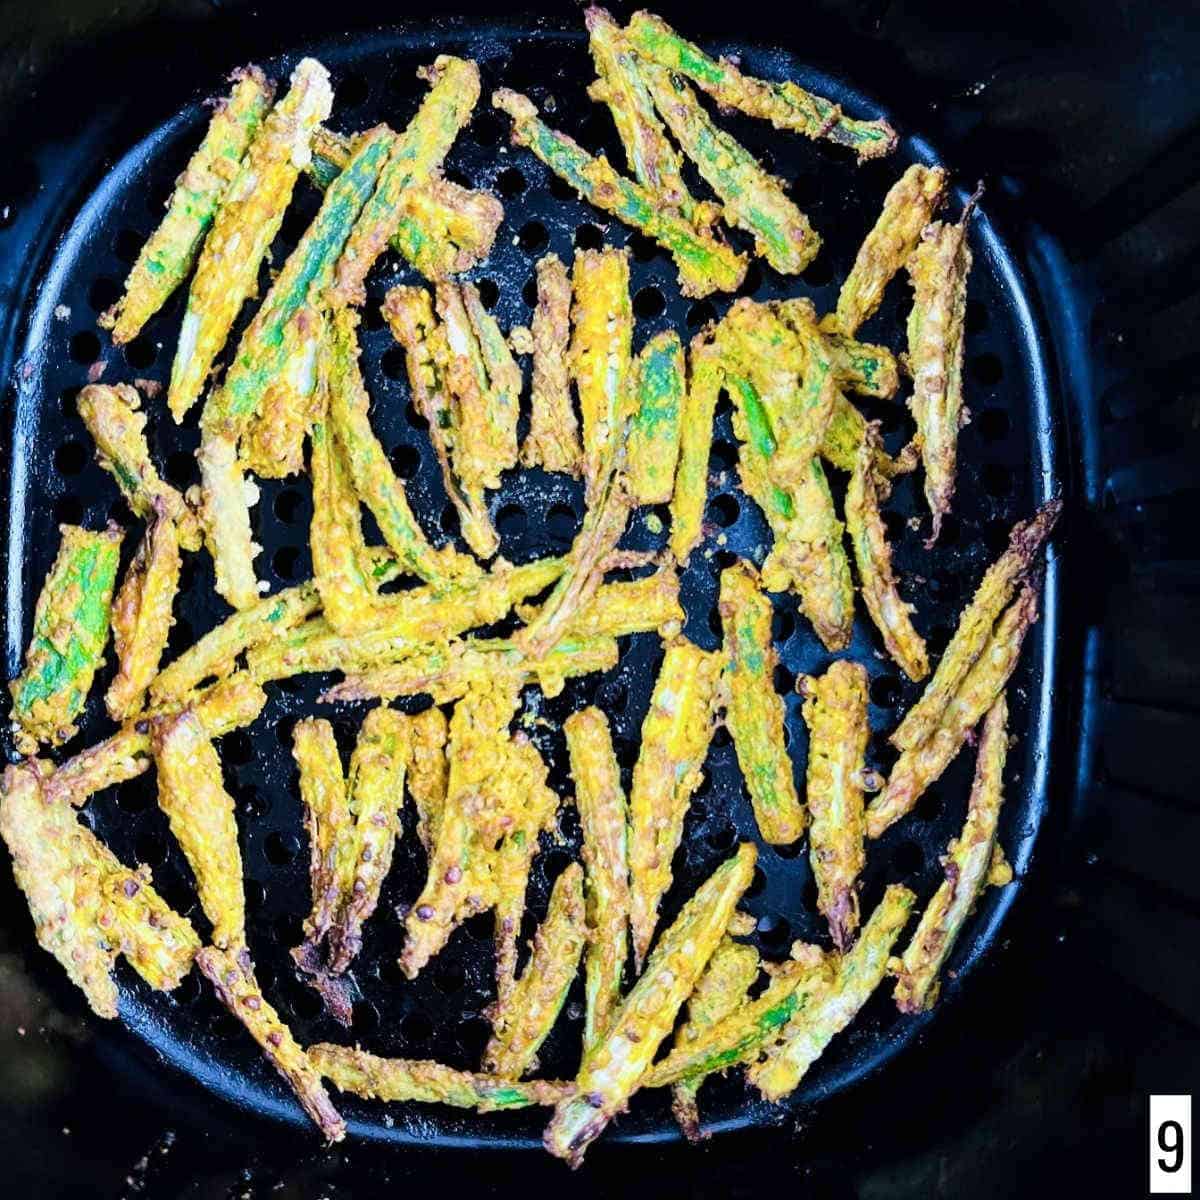 Crispy and crunchy air-fried okra in the air fryer basket.